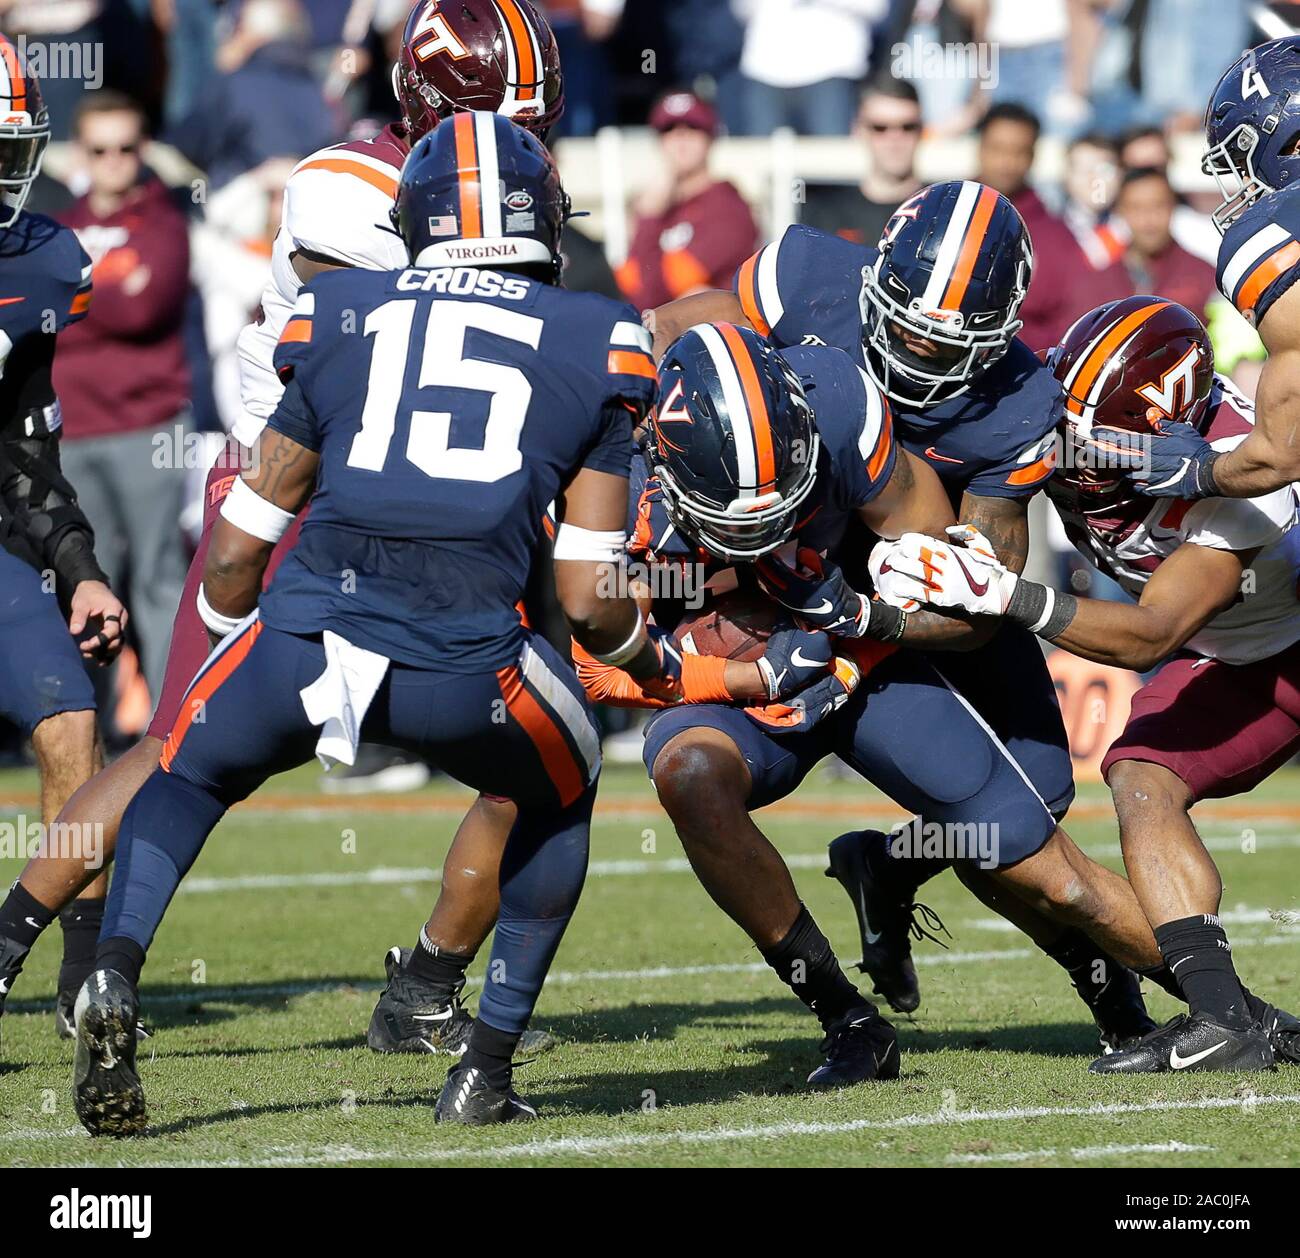 Charlottesville, Virginia, USA. 29th Nov, 2019. Virginia Cavaliers OLB #14 Noah Taylor causes a turnover during NCAA football game between the University of Virginia Cavaliers and the Virginia Tech Hokies at Scott Stadium in Charlottesville, Virginia. Justin Cooper/CSM/Alamy Live News Stock Photo